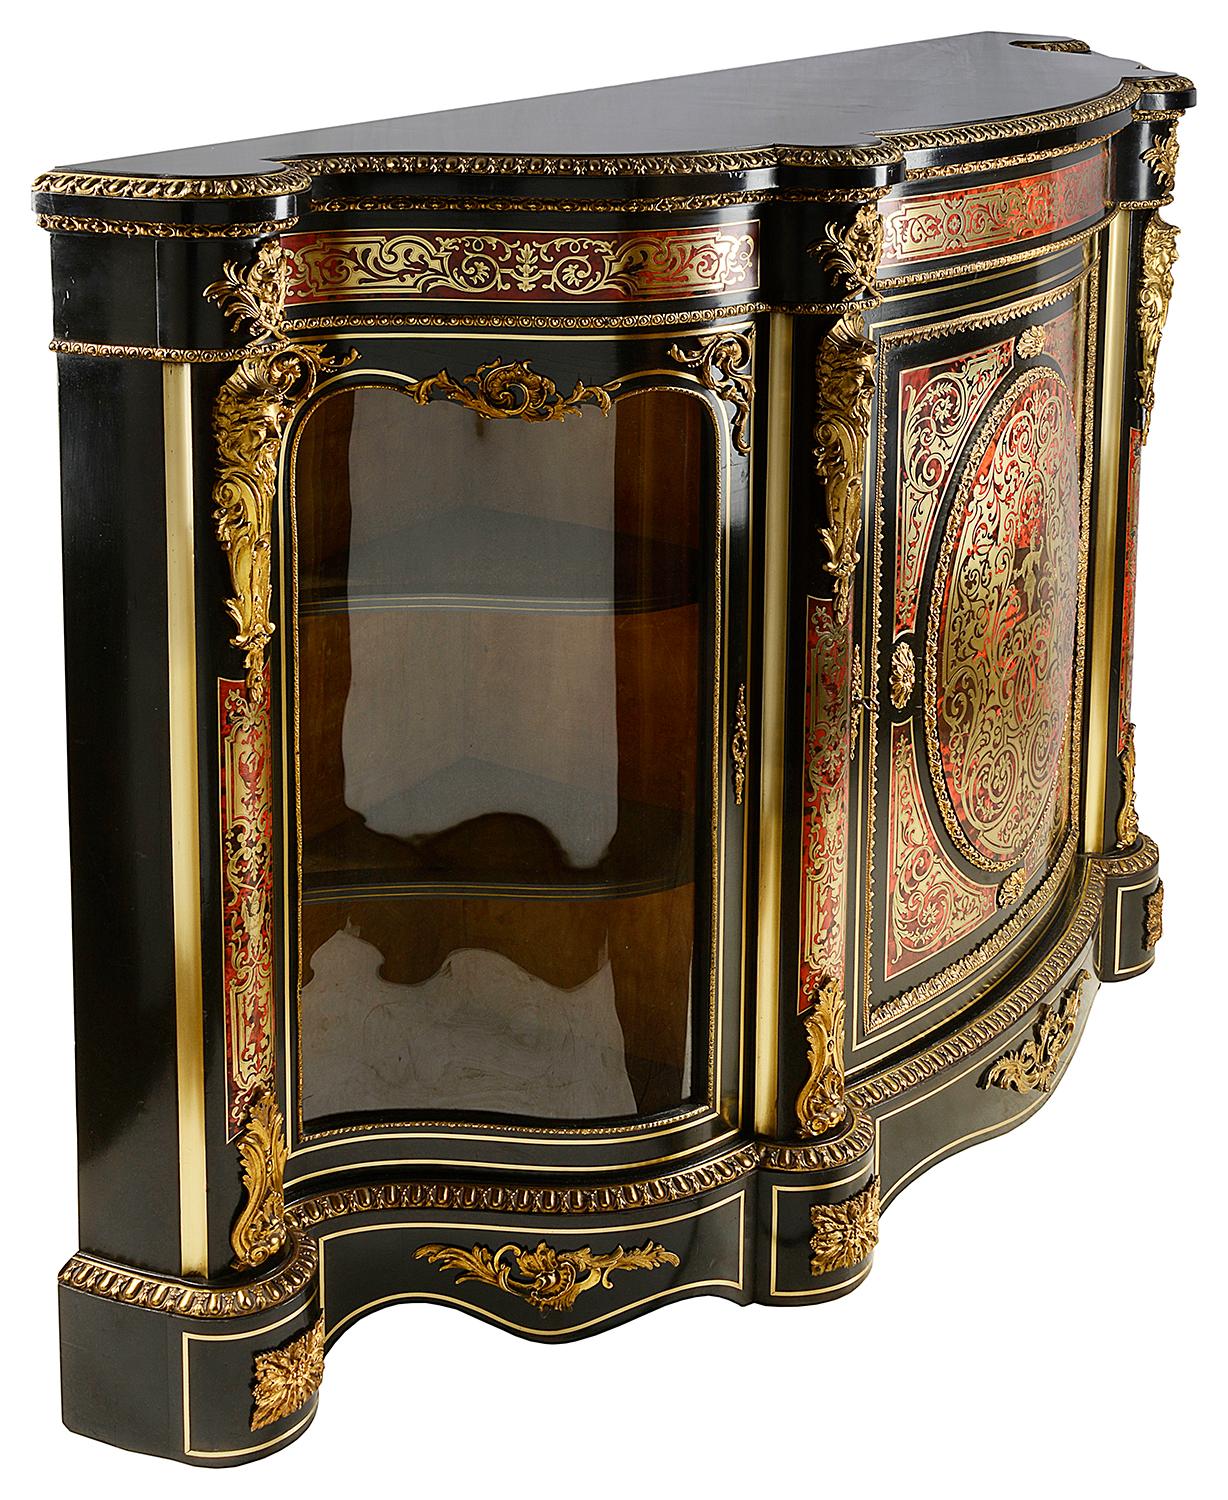 A very good quality 19th century French Boulle serpentine fronted credenza, having shaped glazed doors to either end with shelves within. The central door with classical scrolling foliate decoration to the brass inlay and a classical figure in the